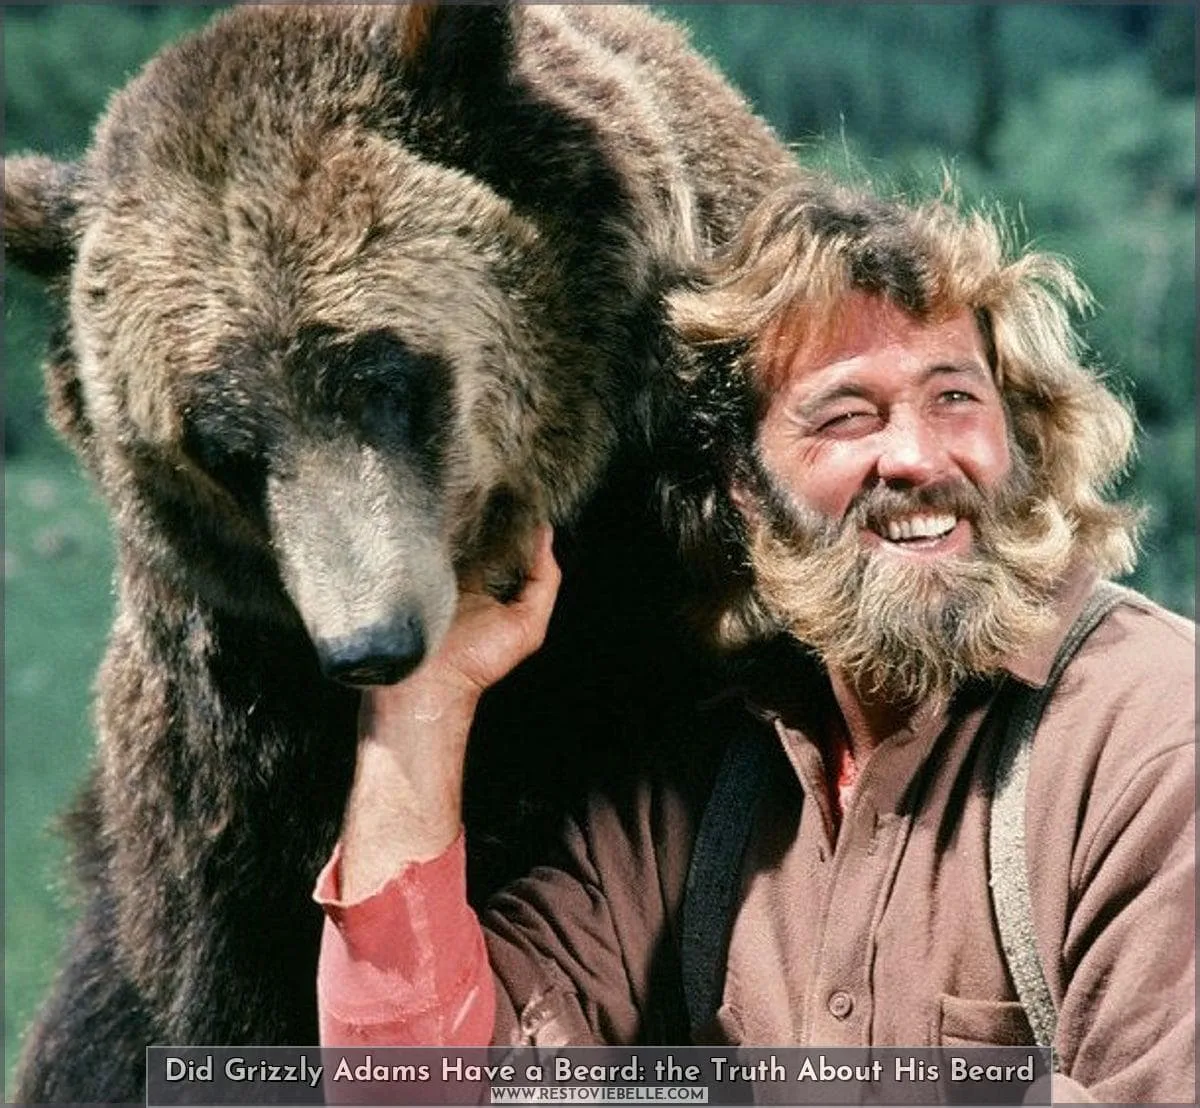 Did Grizzly Adams Have a Beard